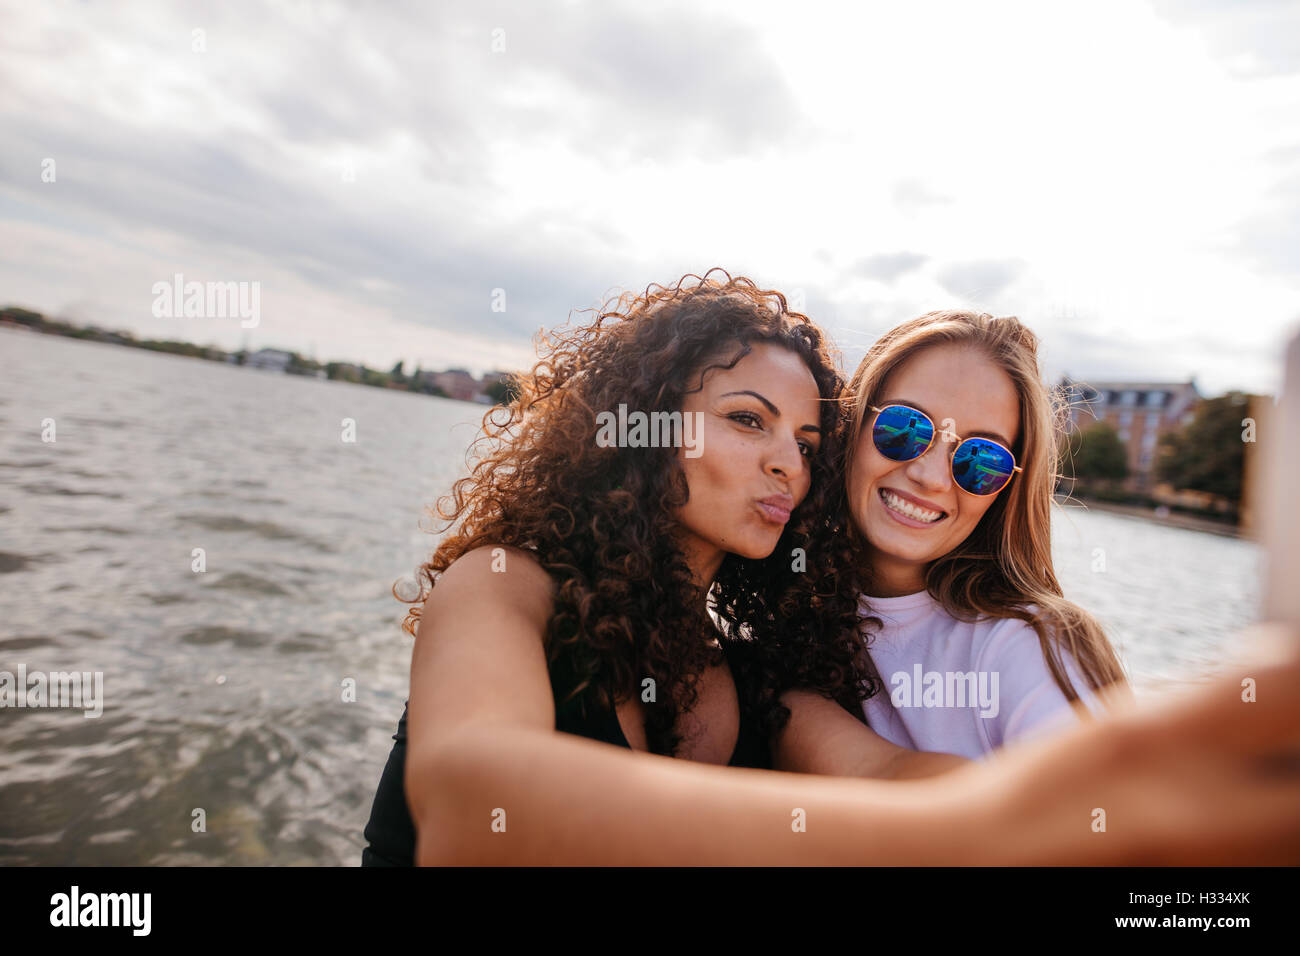 Shot of beautiful girls taking selfie with mobile phone by the lake. Young women posing for self portrait. Stock Photo